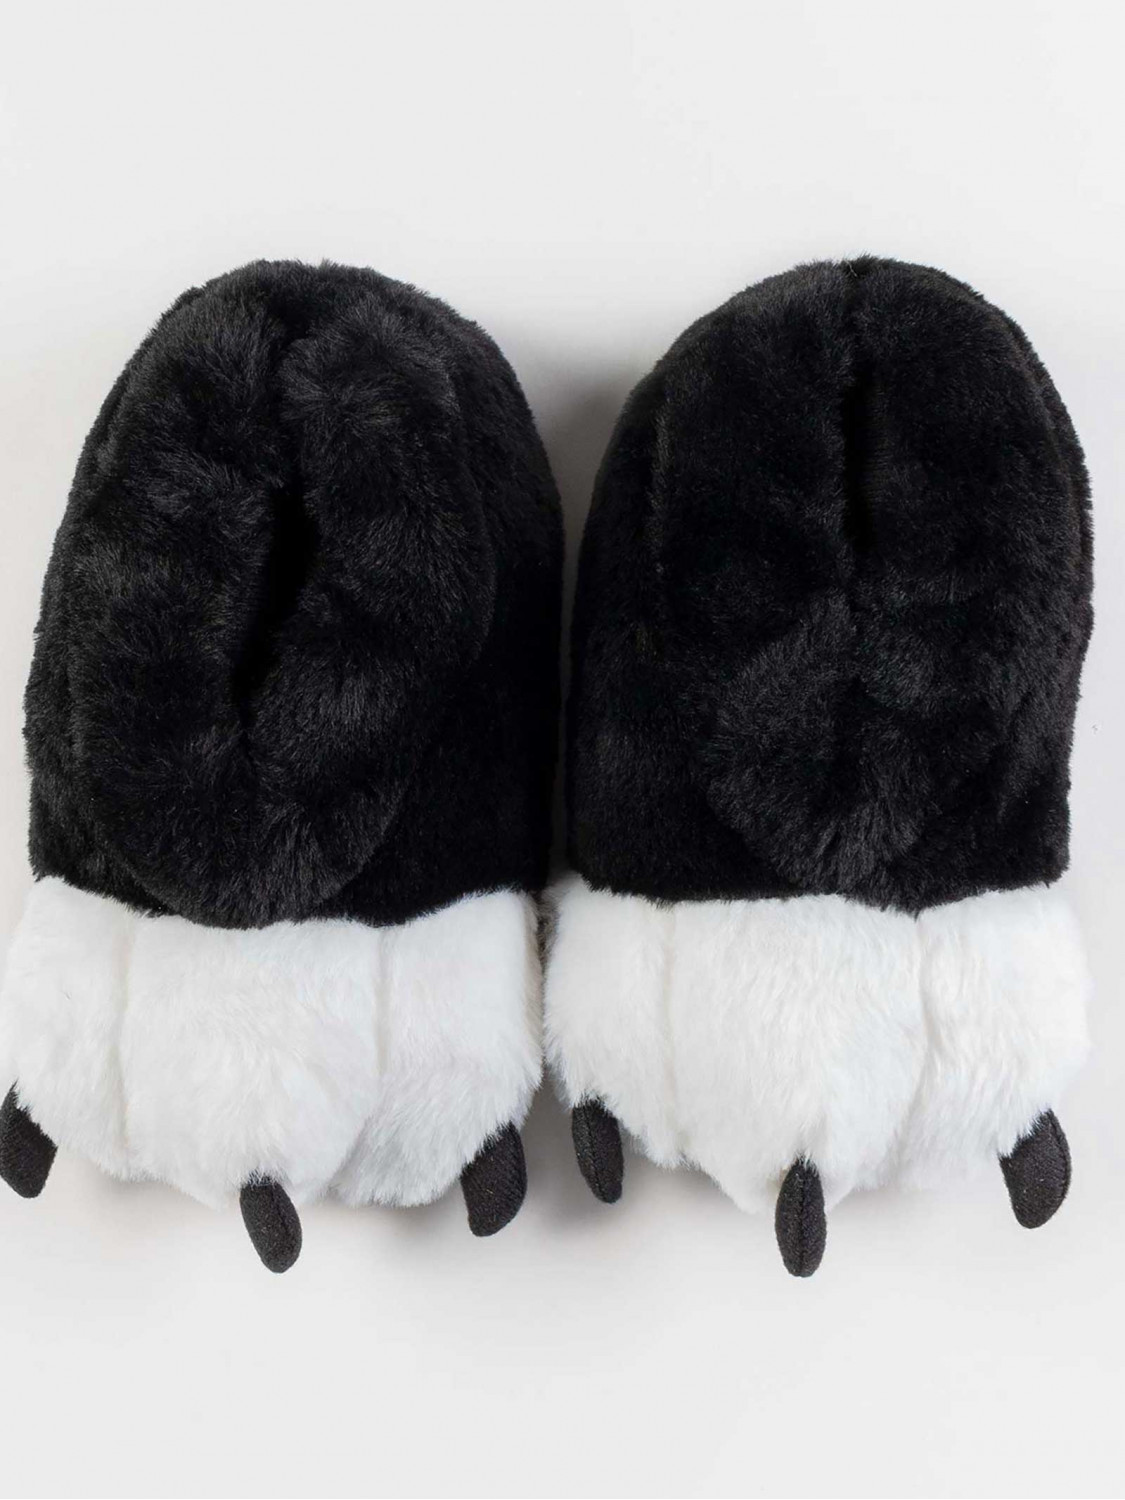 LazyOne Animal Paw Slippers, Brown Bear, Child and Adult Unisex Furry  Slipper, X-small - Walmart.com